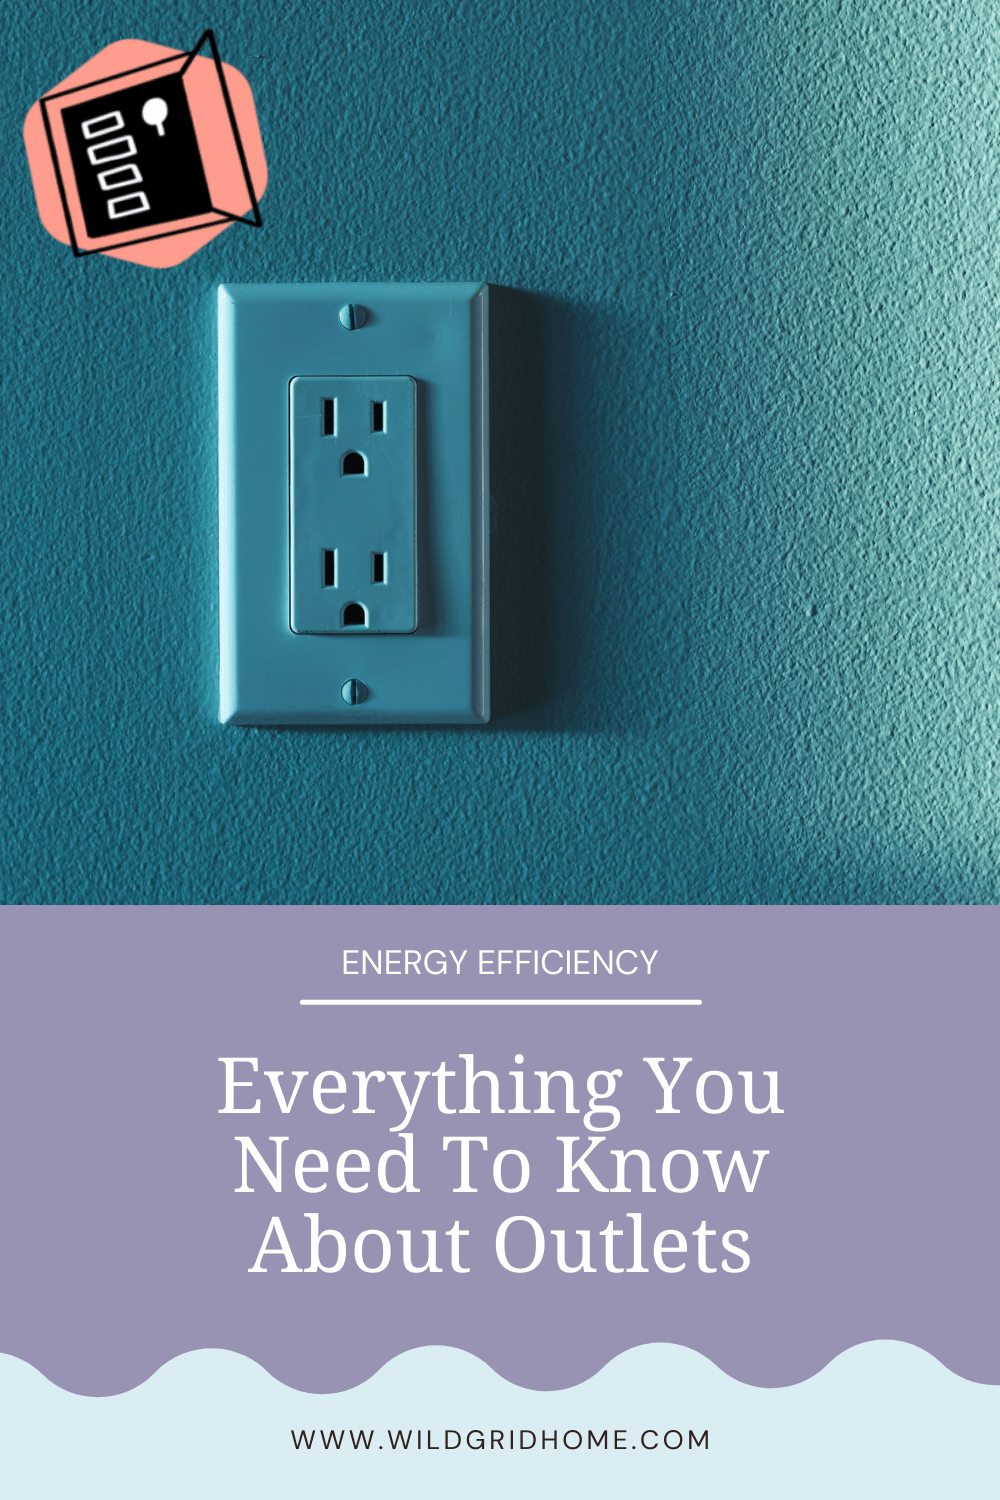 Everything You Need to Know About Outlets - Wildgrid Home